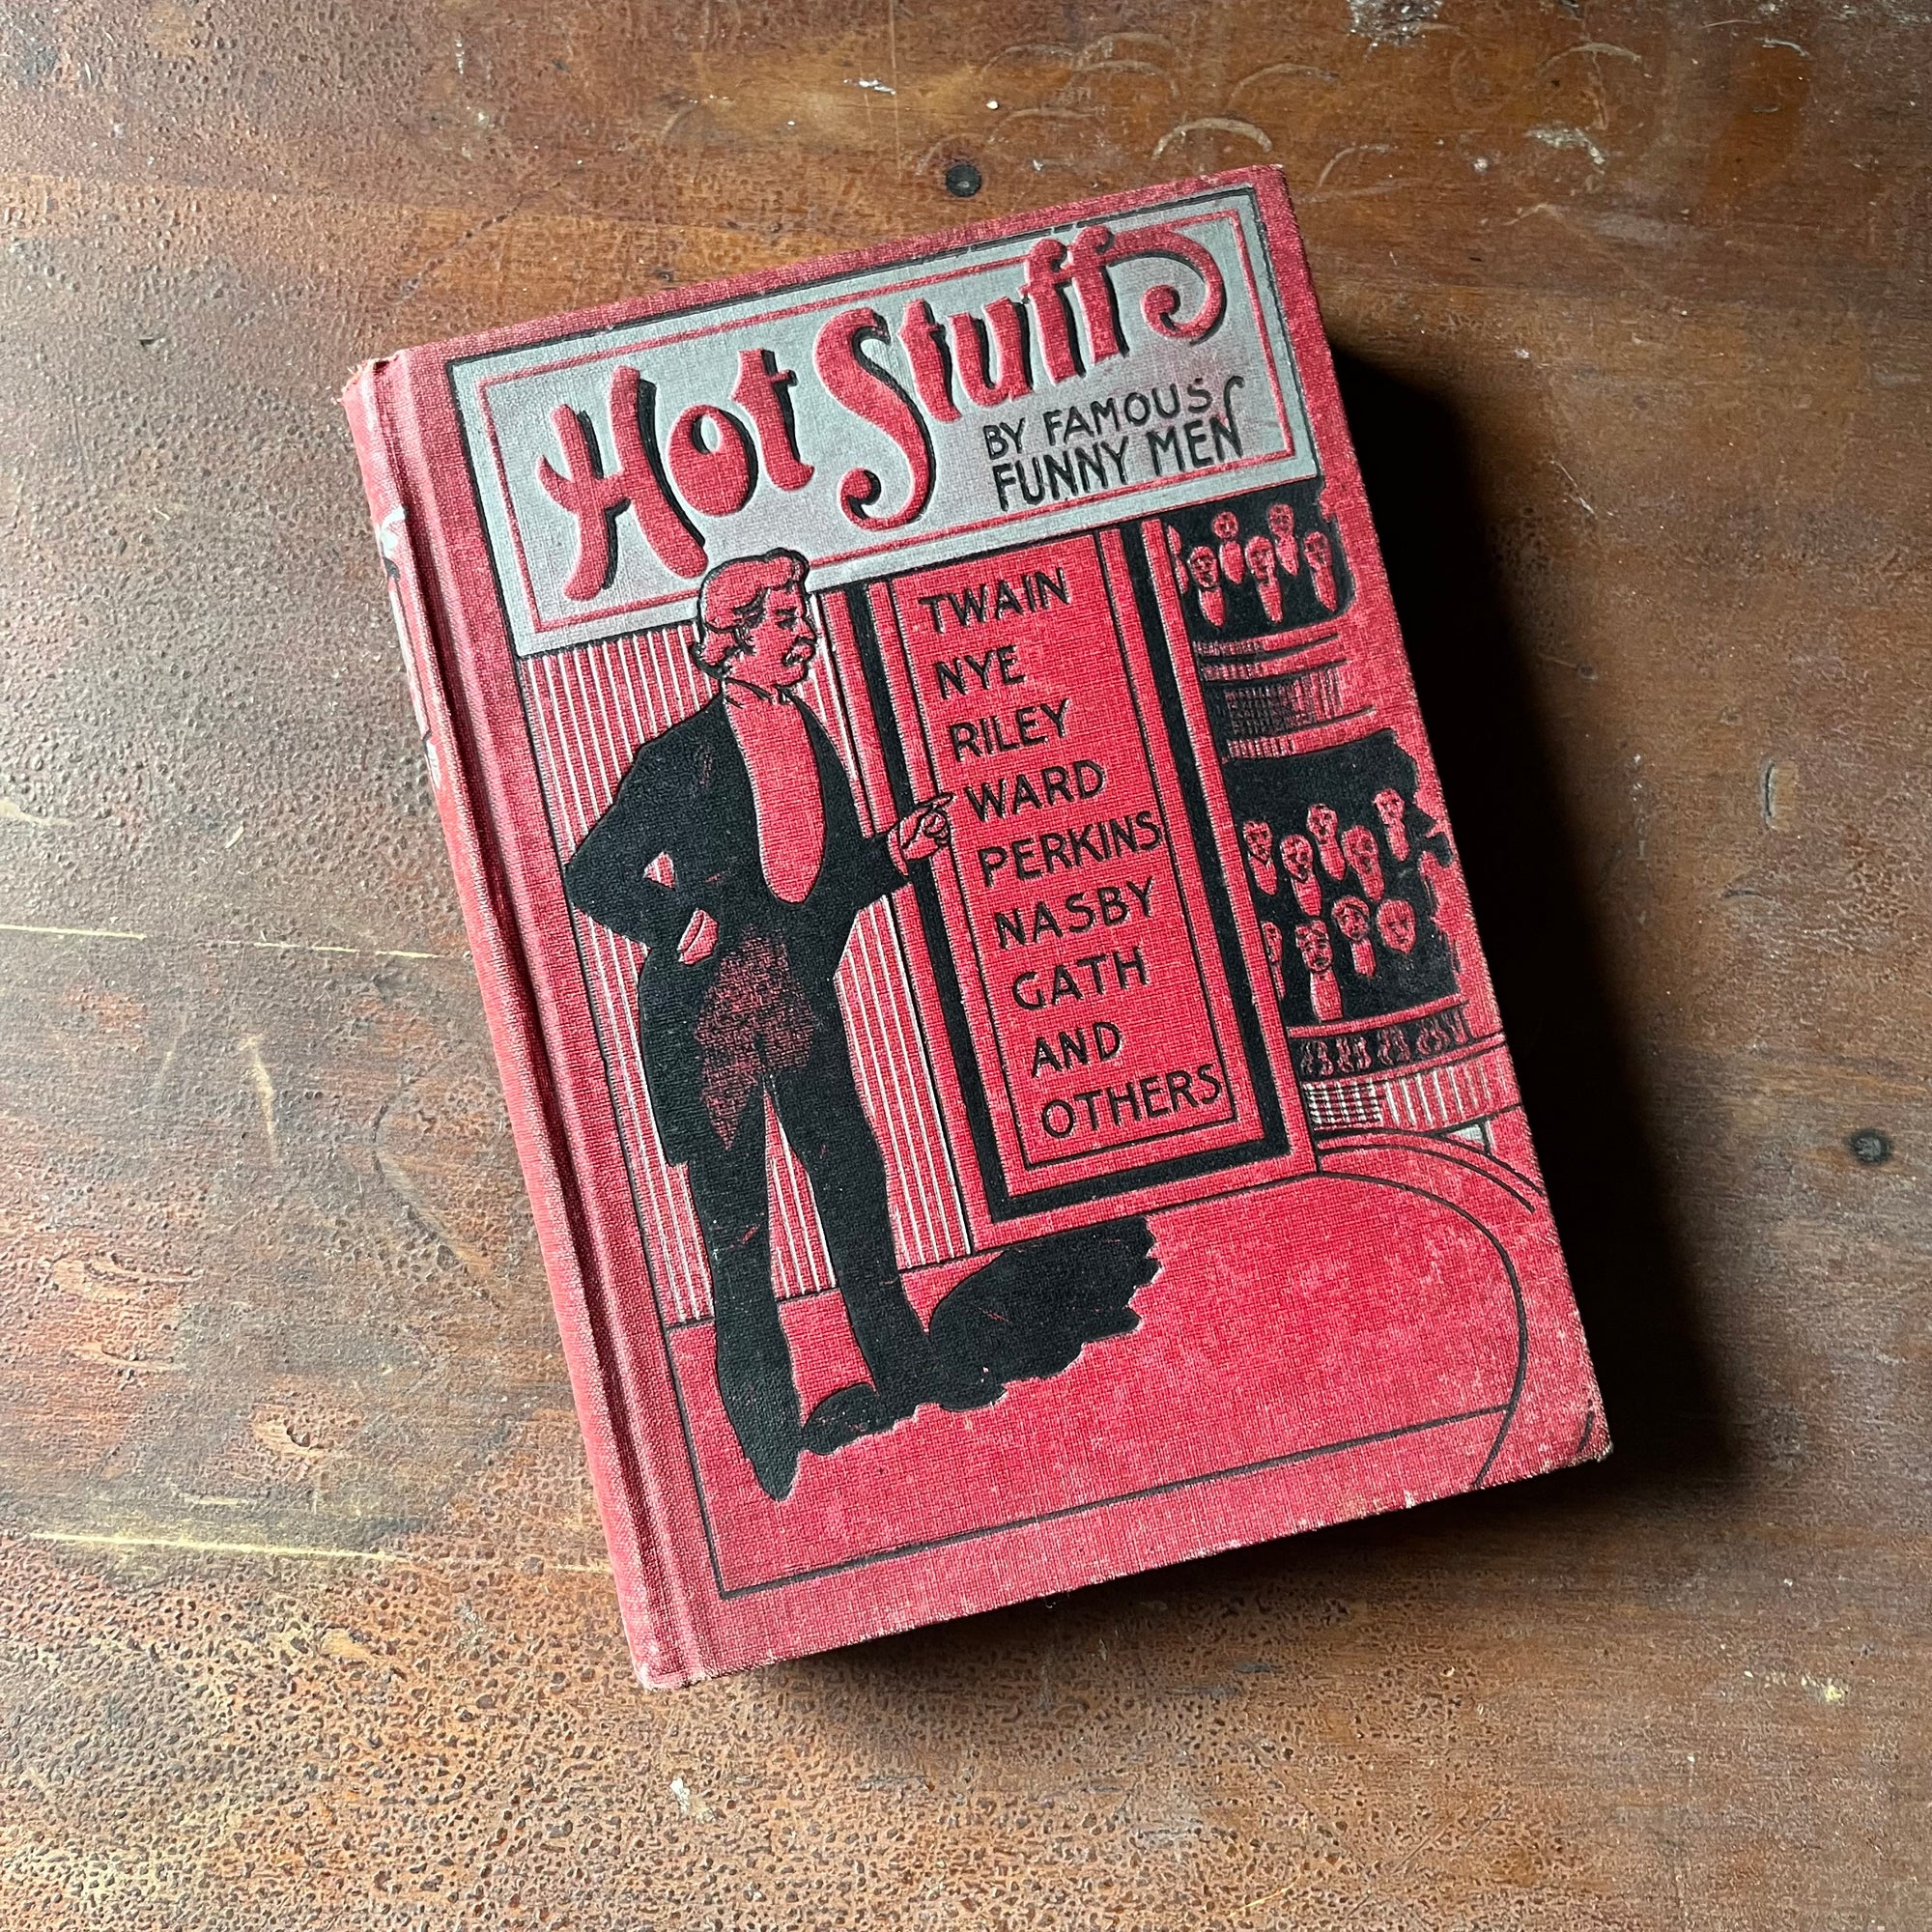 Hot Stuff by Famous Funny Men - 1901 Edition - view of the embossed front cover